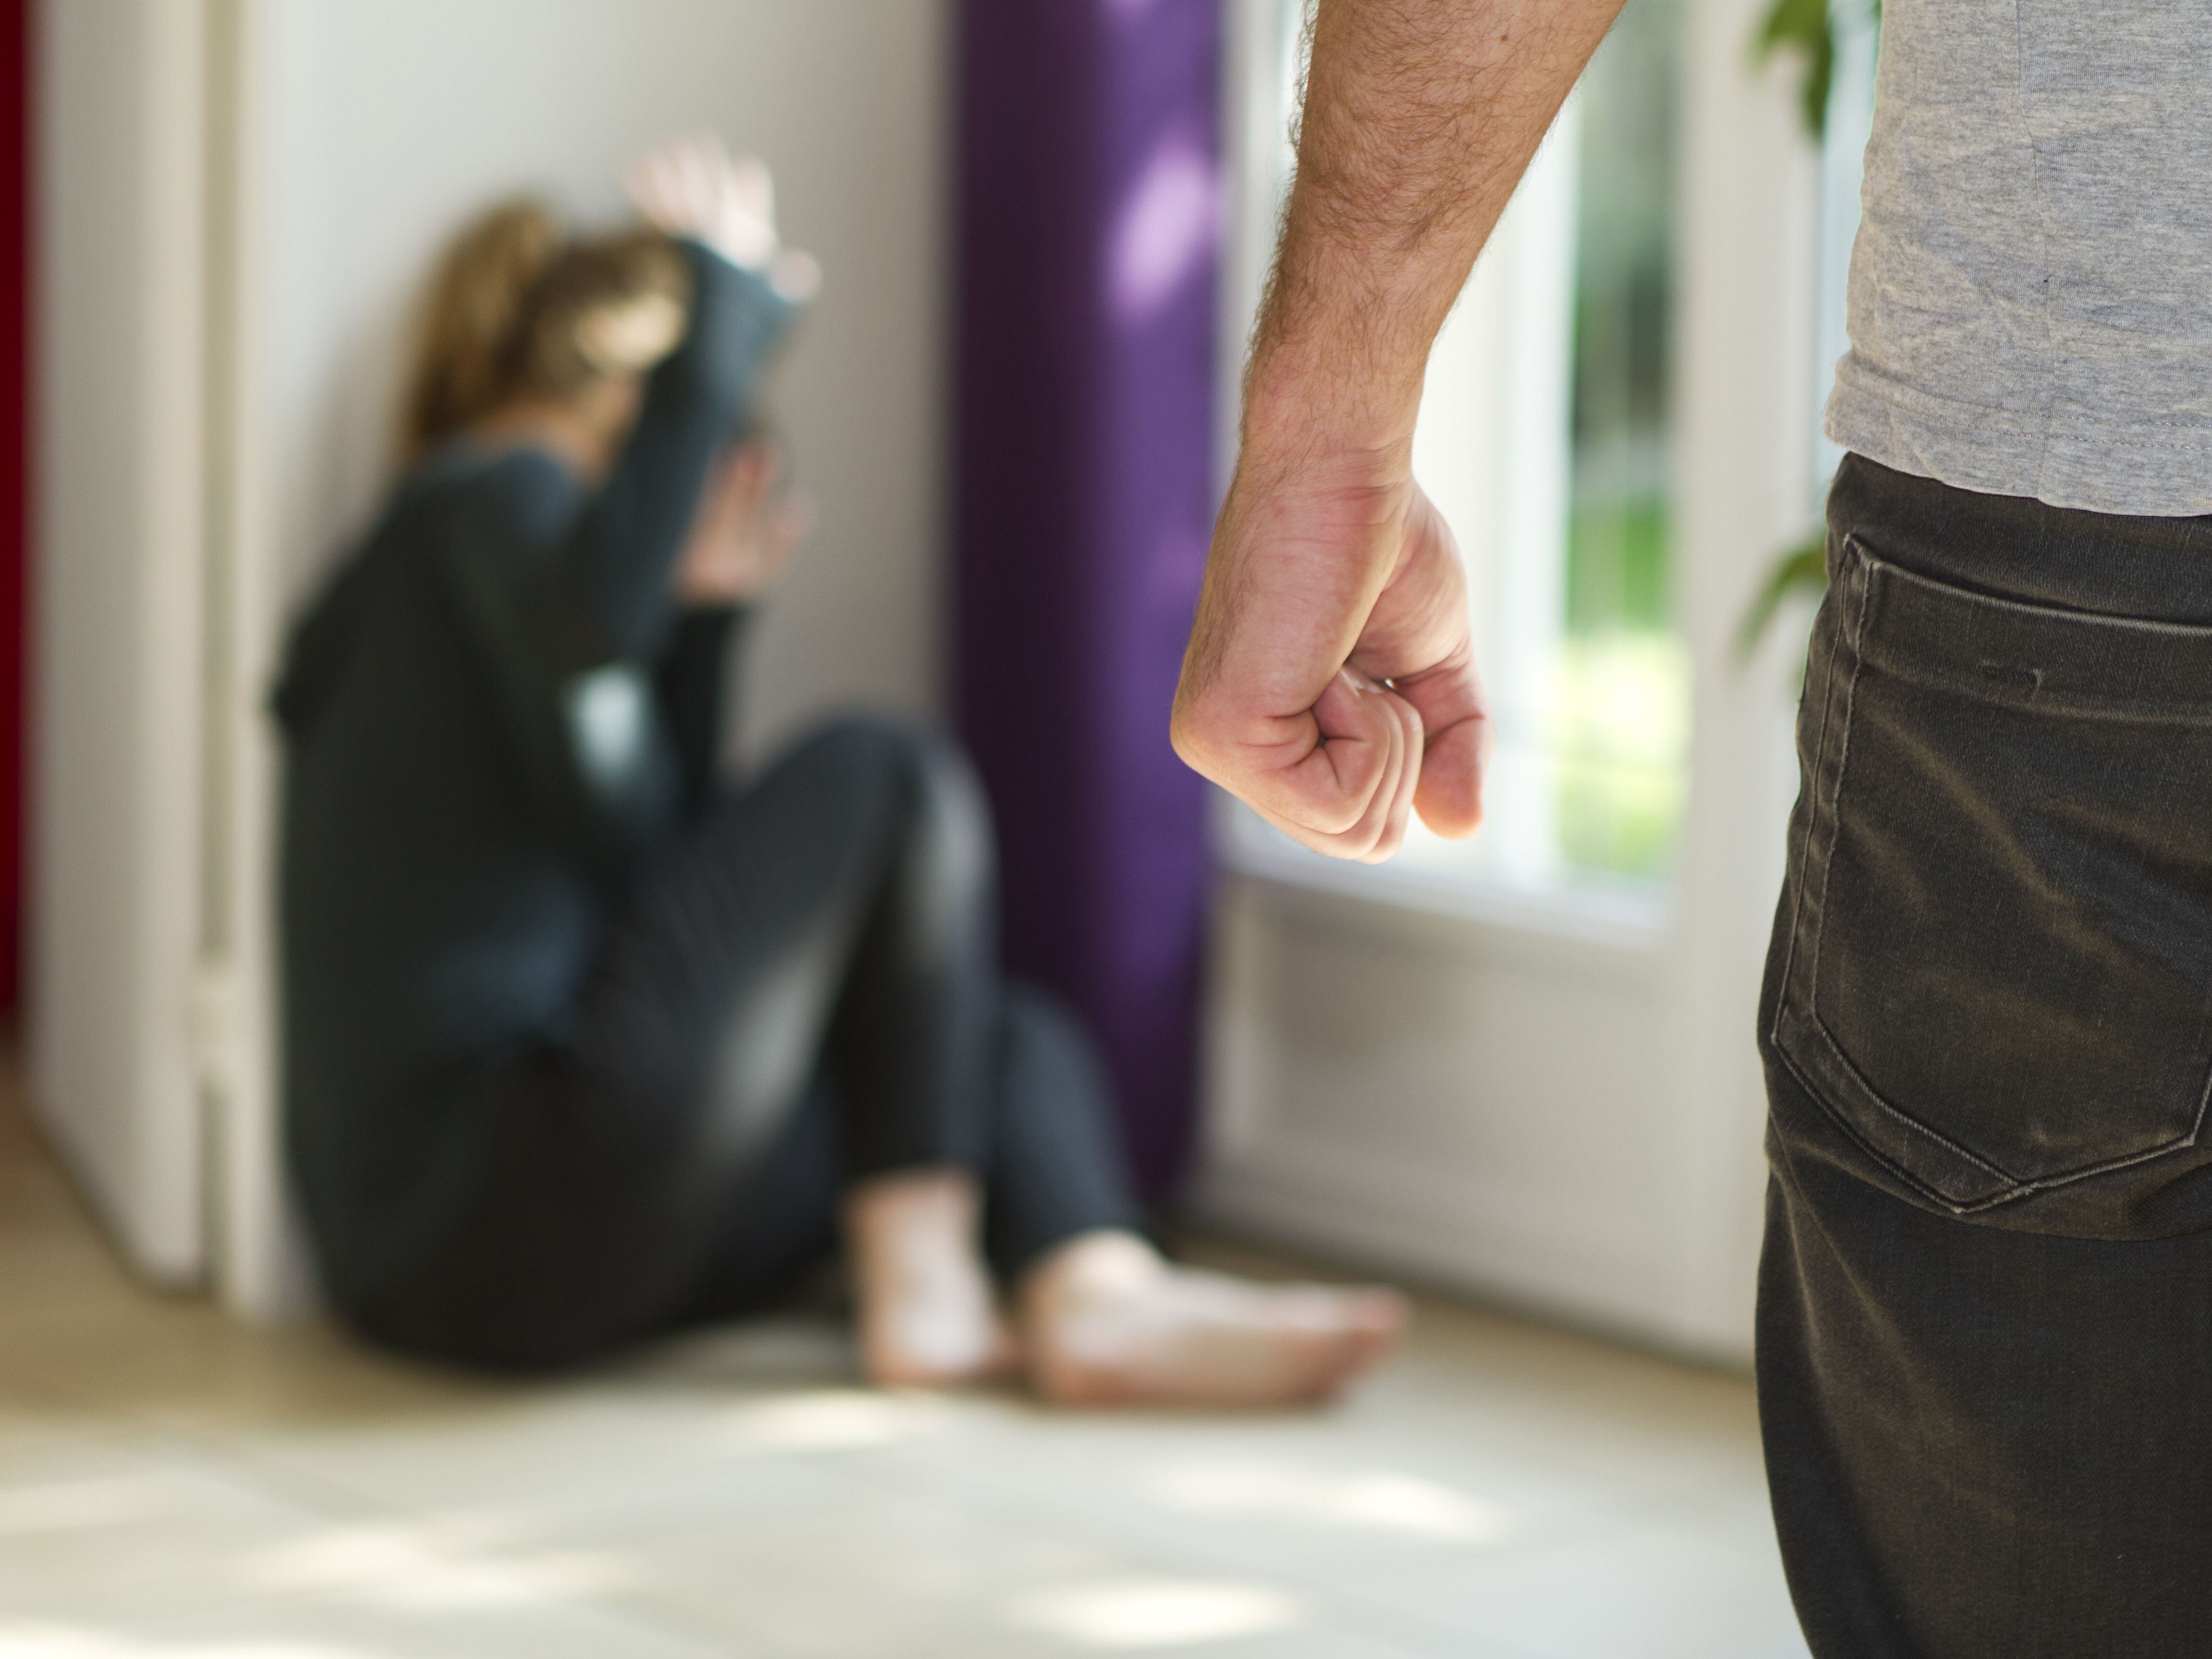 'Worrying' increase in domestic abuse during pandemic as victims are left 'isolated'